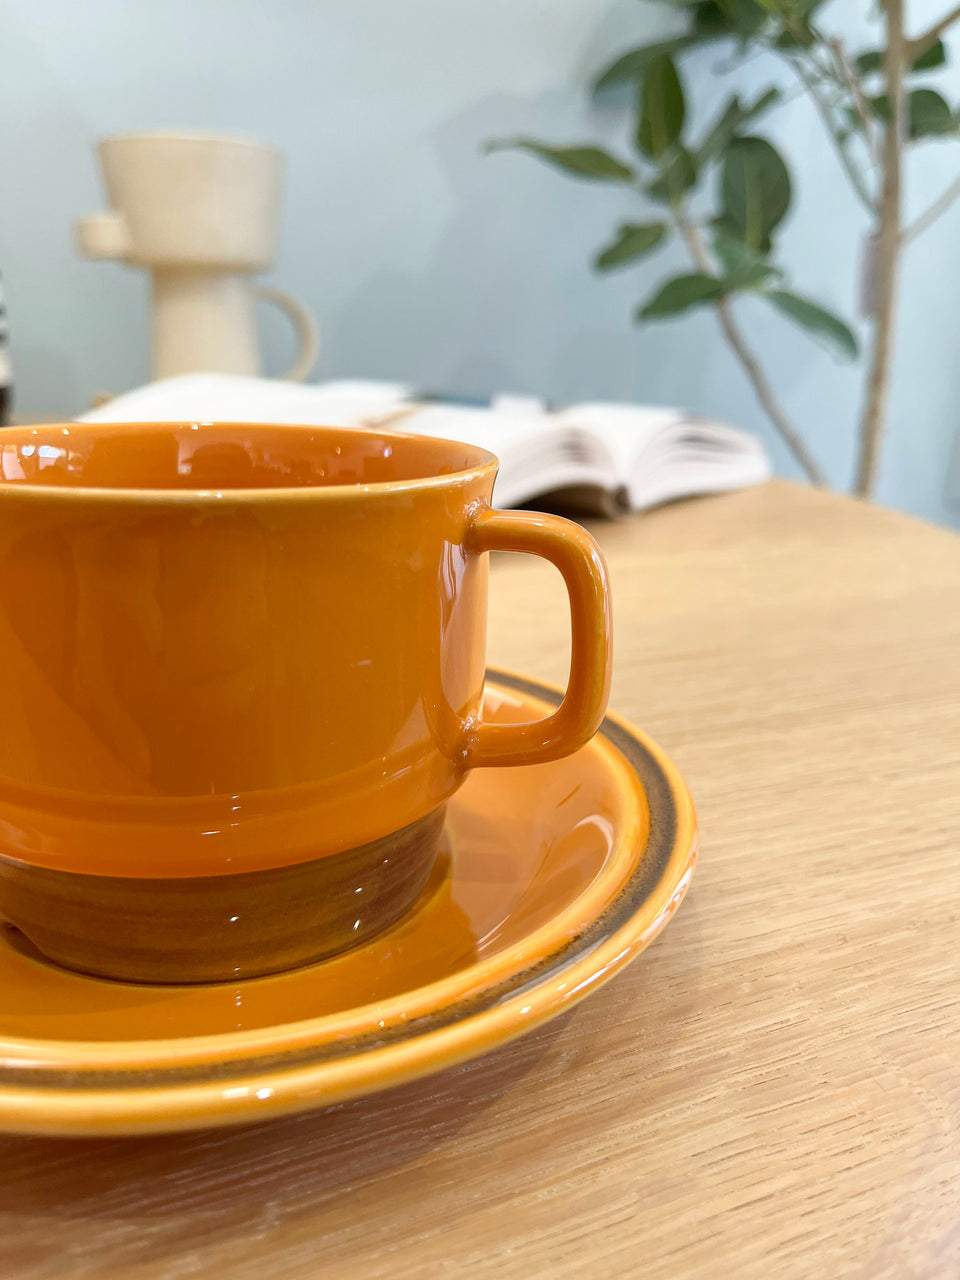 Egersund Unique Teacup and Saucer Plate Trio/エーゲルスン ユニーク ティーカップ&ソーサー プレート トリオ ノルウェーヴィンテージ 北欧食器